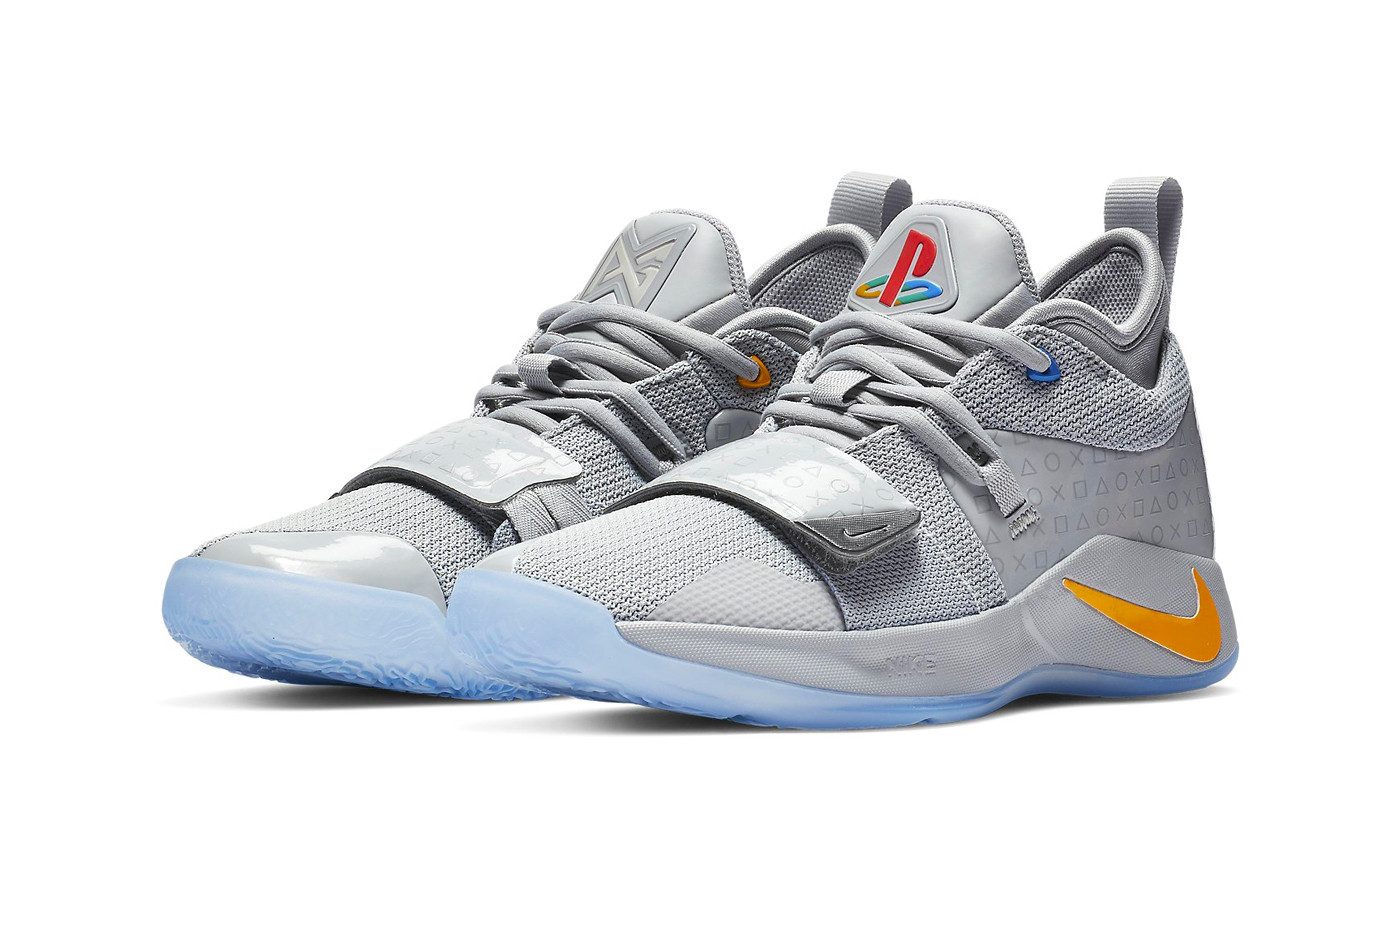 Flipboard: Paul George & Nike Prep Another Sony-Themed Sneaker With the “PlayStation ...